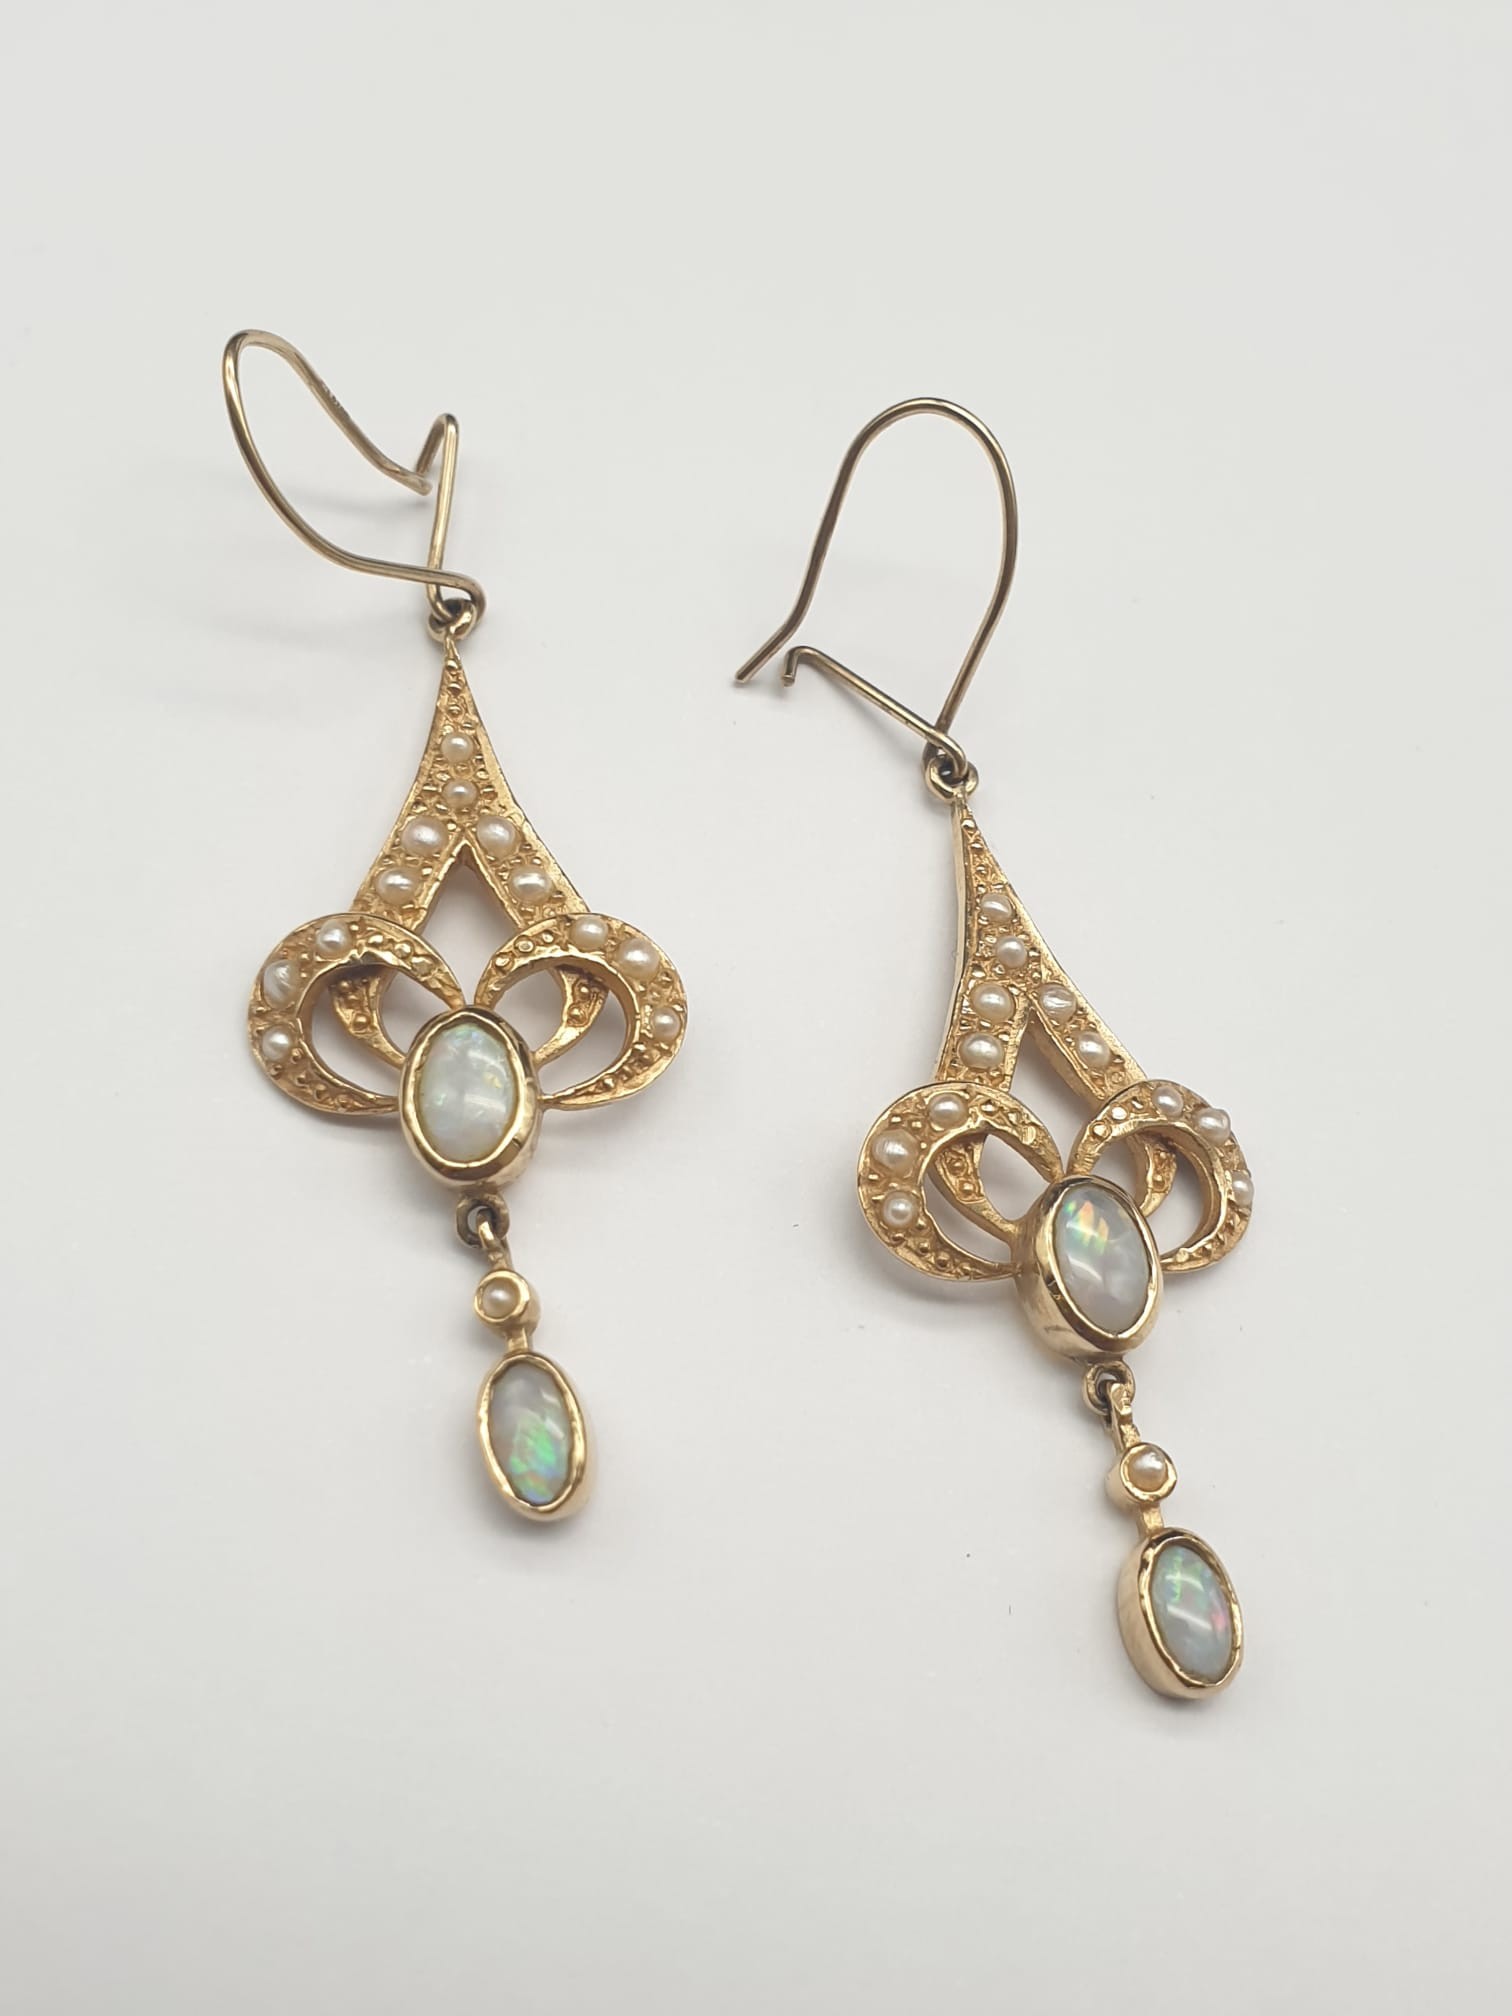 9K Yellow Gold Seed Pearl and Opal Drop Earrings. 3.9g.